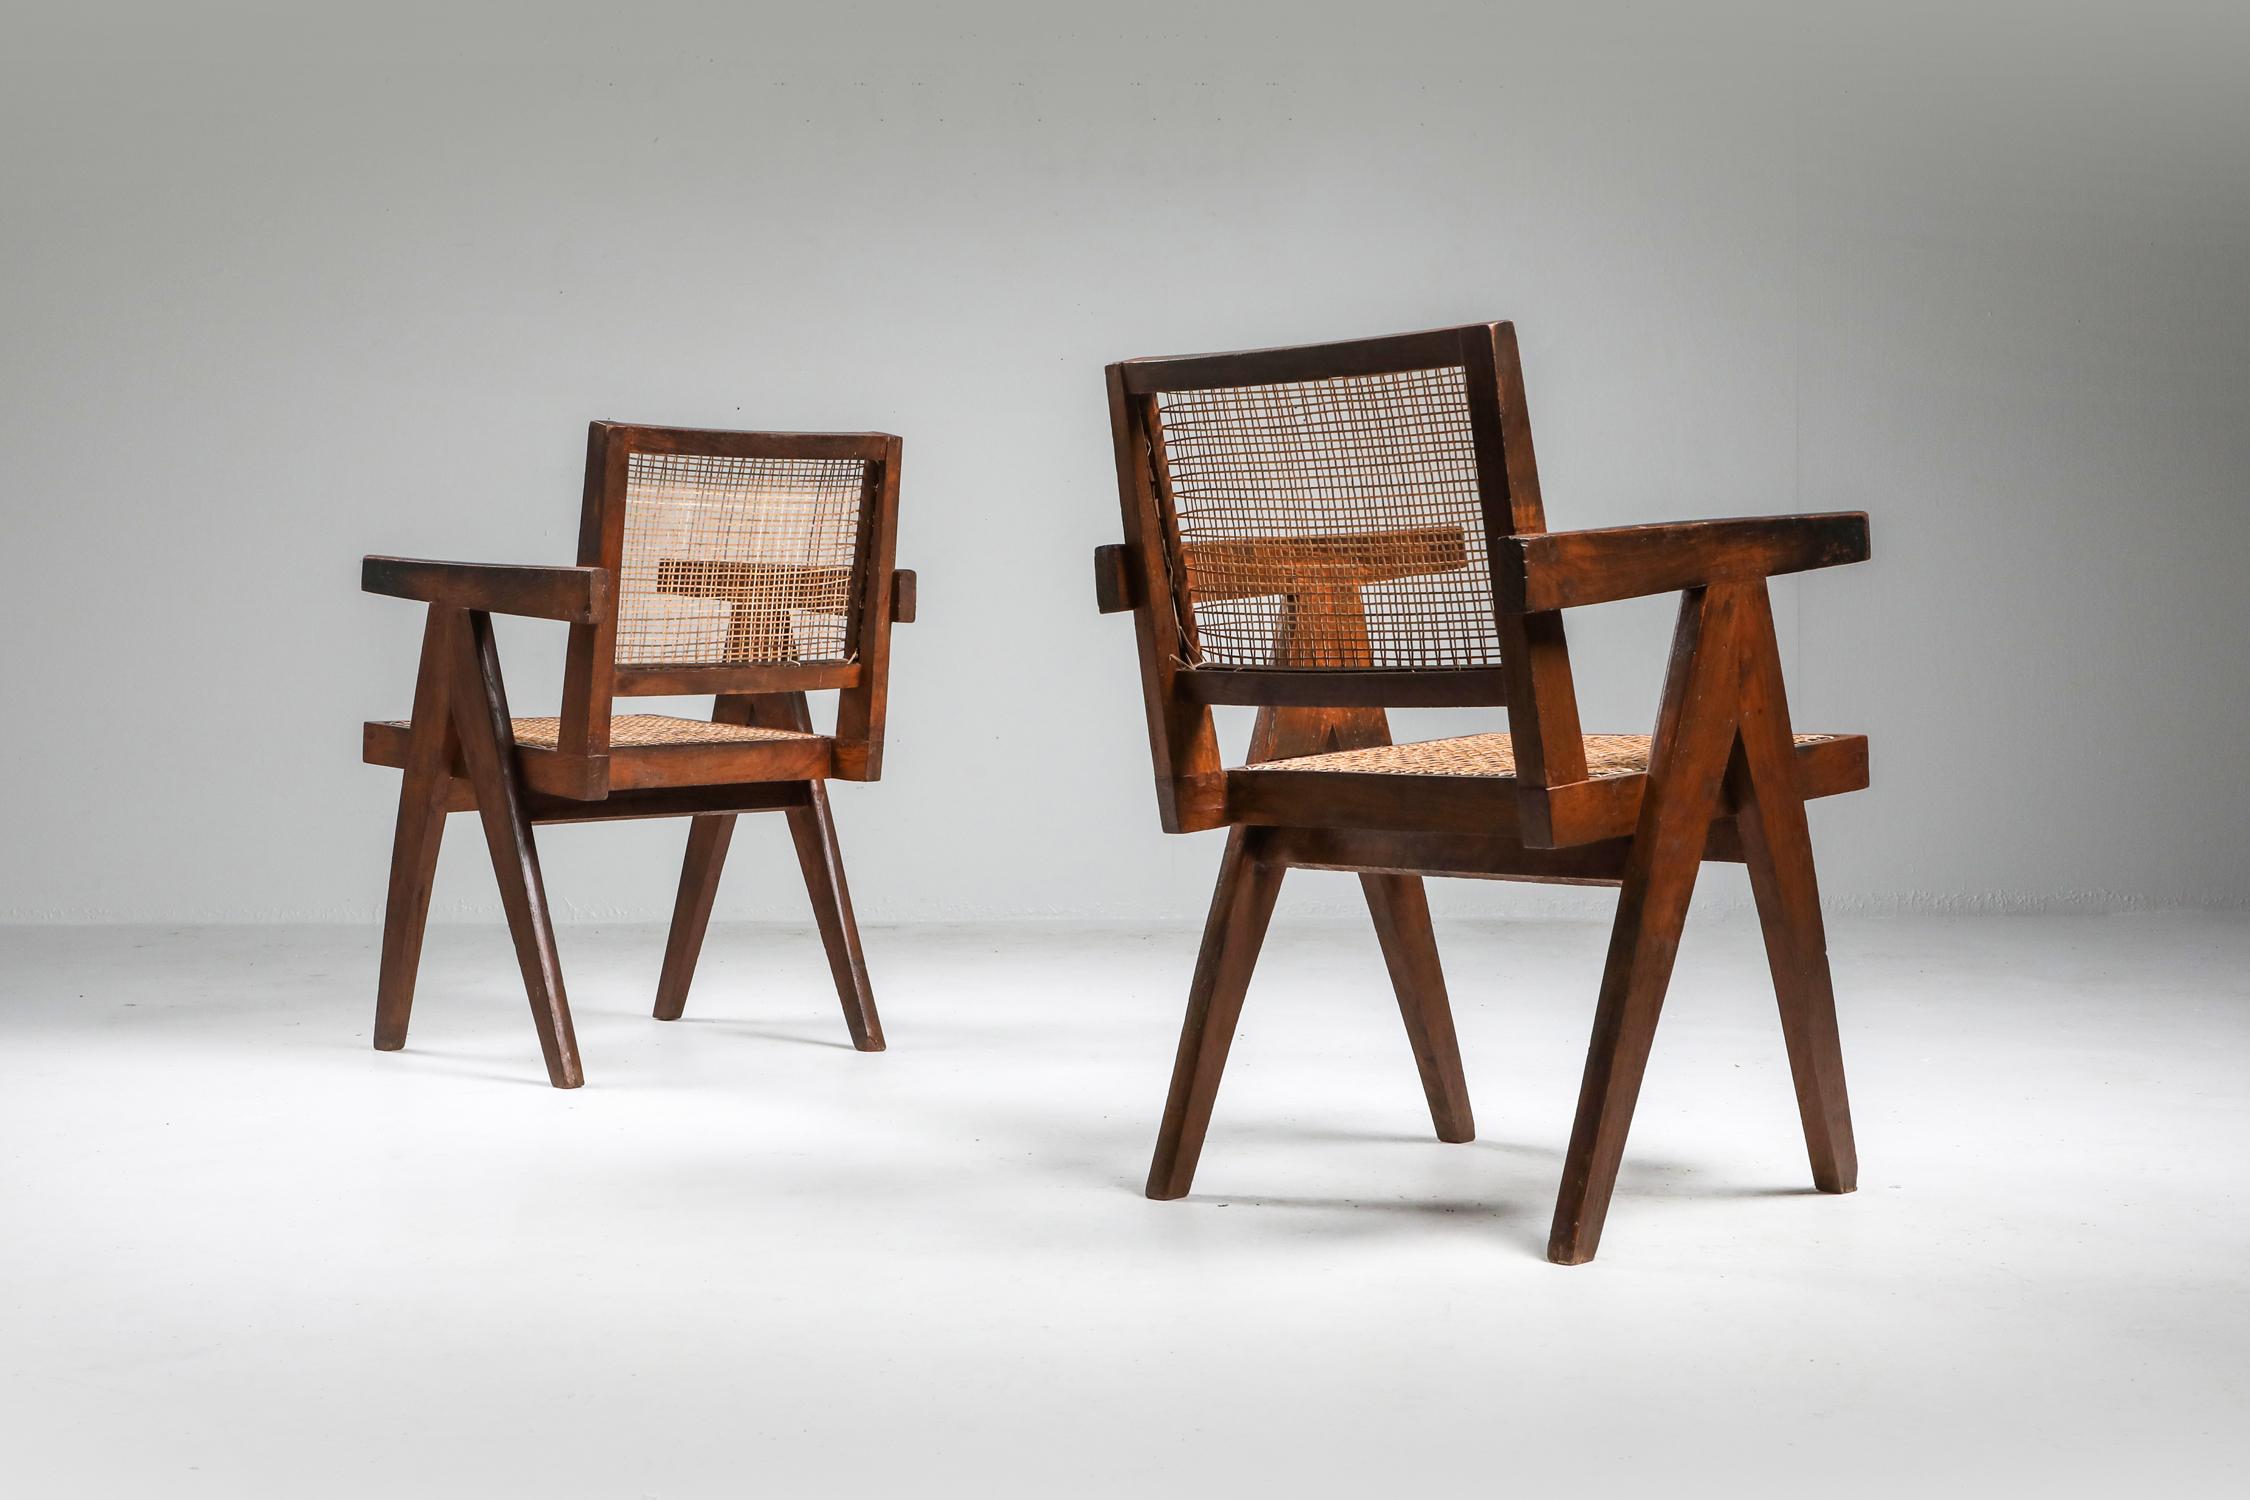 Pierre Jeanneret, office or dining chair, for Administrative buildings form Chandigarh, India 1960s

Original vintage piece with new cane seating.
 